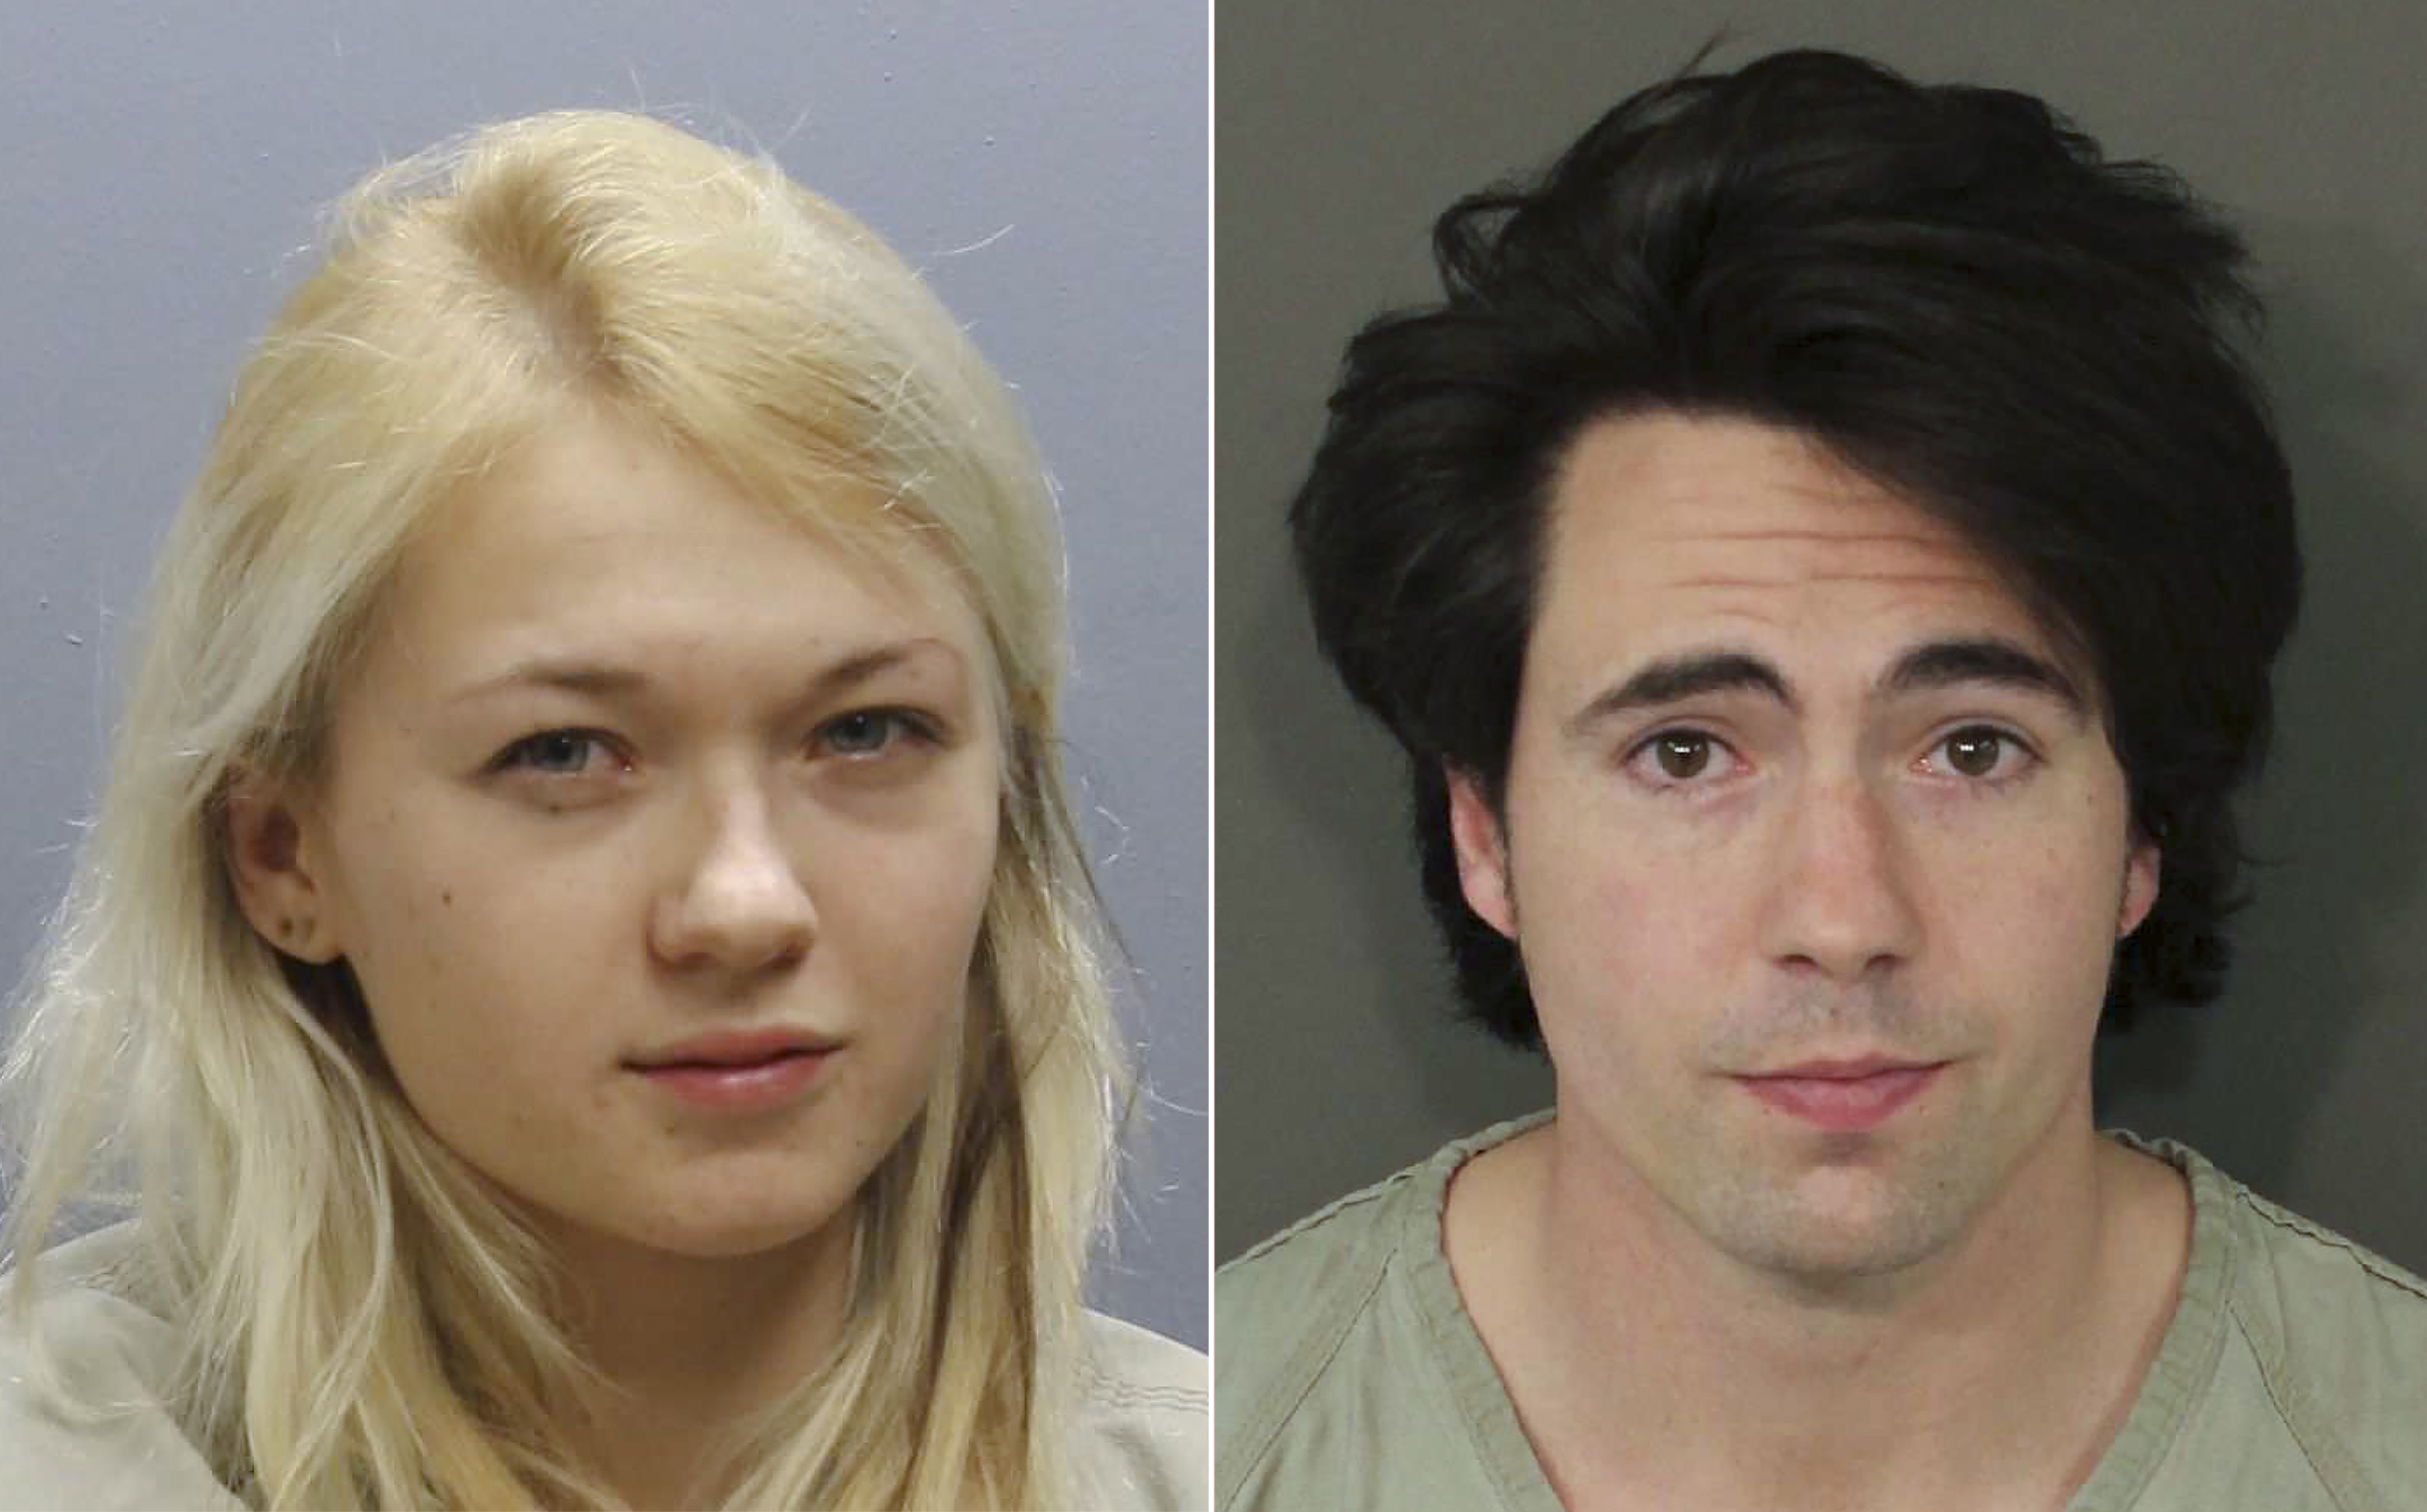 A composite image shows photos released by the Franklin County Sheriff's Office of Marina Lonina and Raymond Gates, who were charged April 13 with rape, kidnapping, sexual battery and pandering sexually oriented matter involving a minor, for allegedly using an app to livestream the rape of a 17-year-old girl. (Franklin County Sheriff's Office/AP)